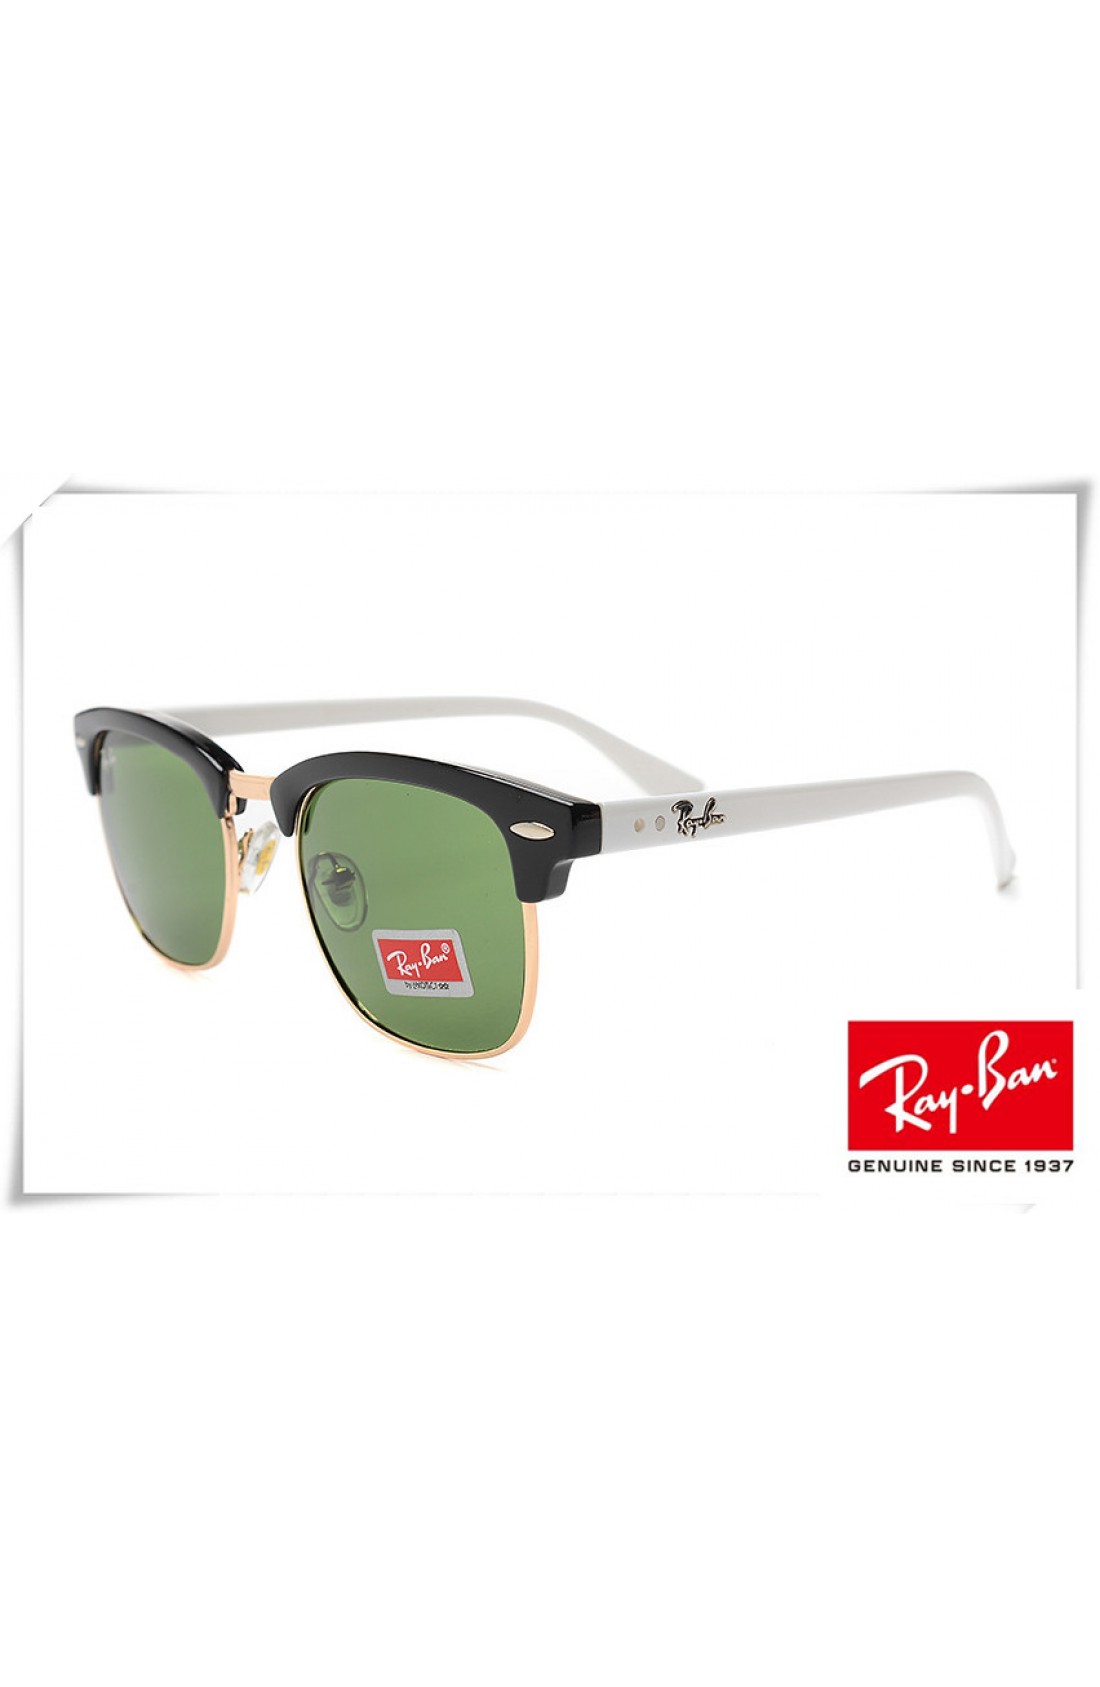 Fake Ray Ban Rb3016 Classic Clubmaster Sunglasses White Black Frame Green Lens Outlet